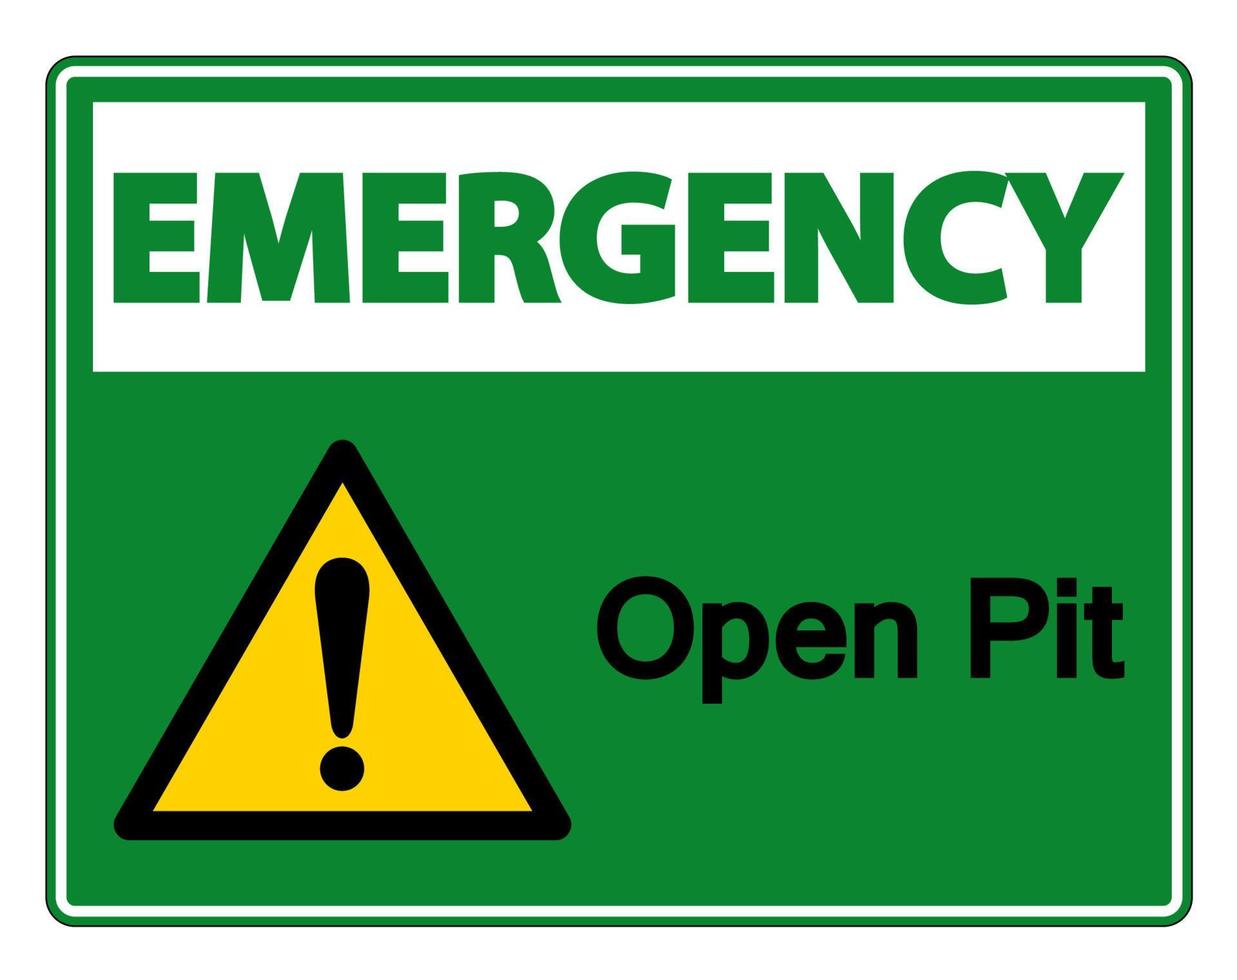 Emergency Open Pit Symbol Sign on white background vector